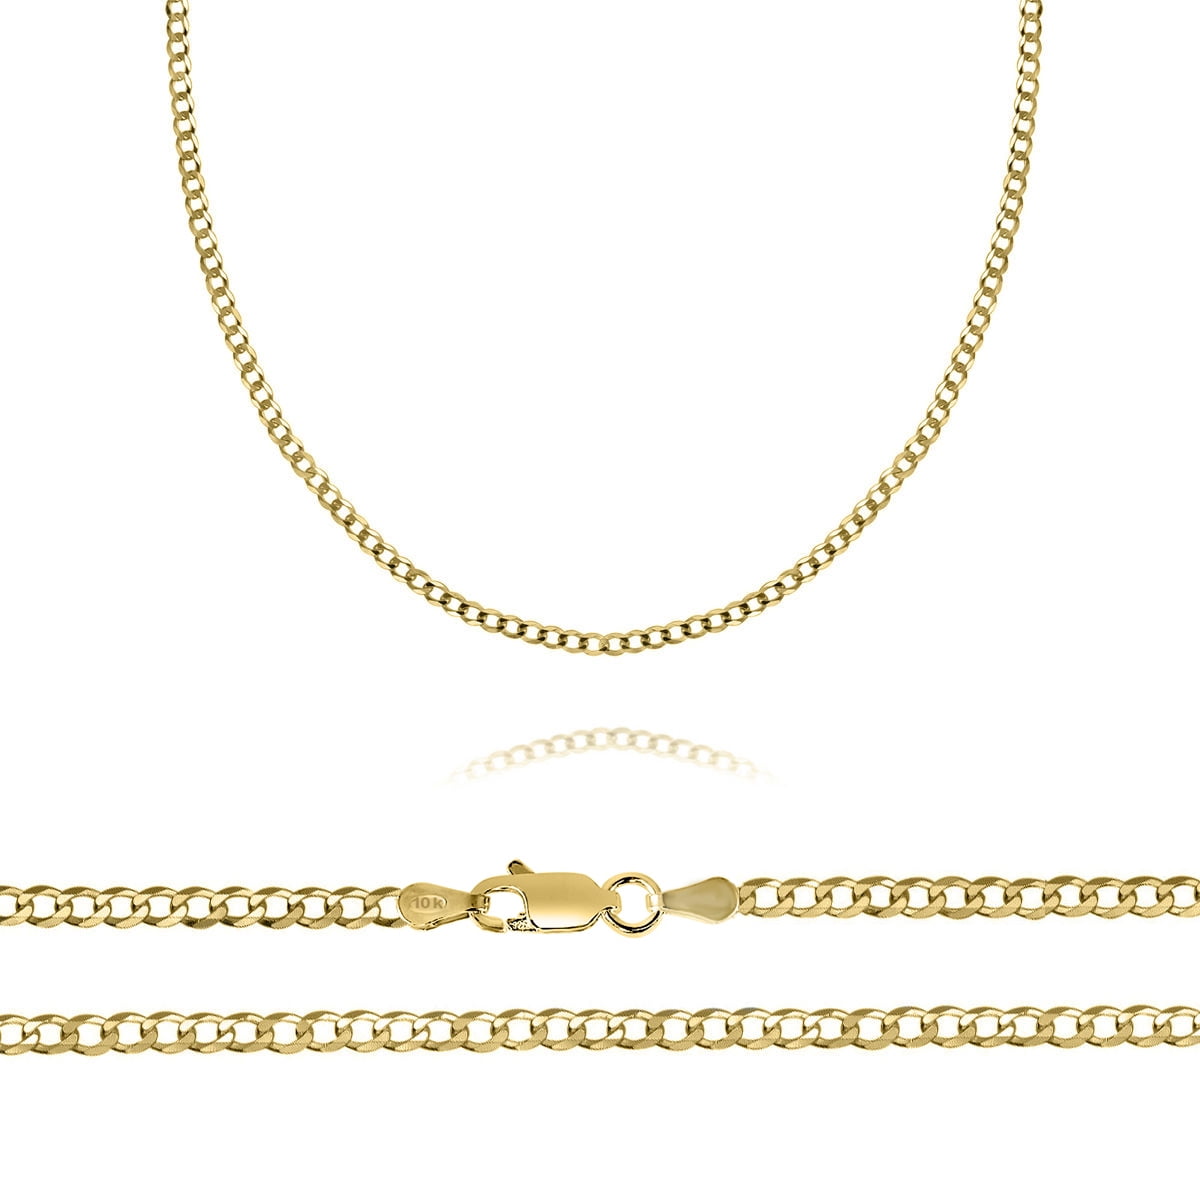 Orostar 14K Yellow and Rose Gold 1.5mm Diamond Cut Rope Chain Necklace White 16-30 